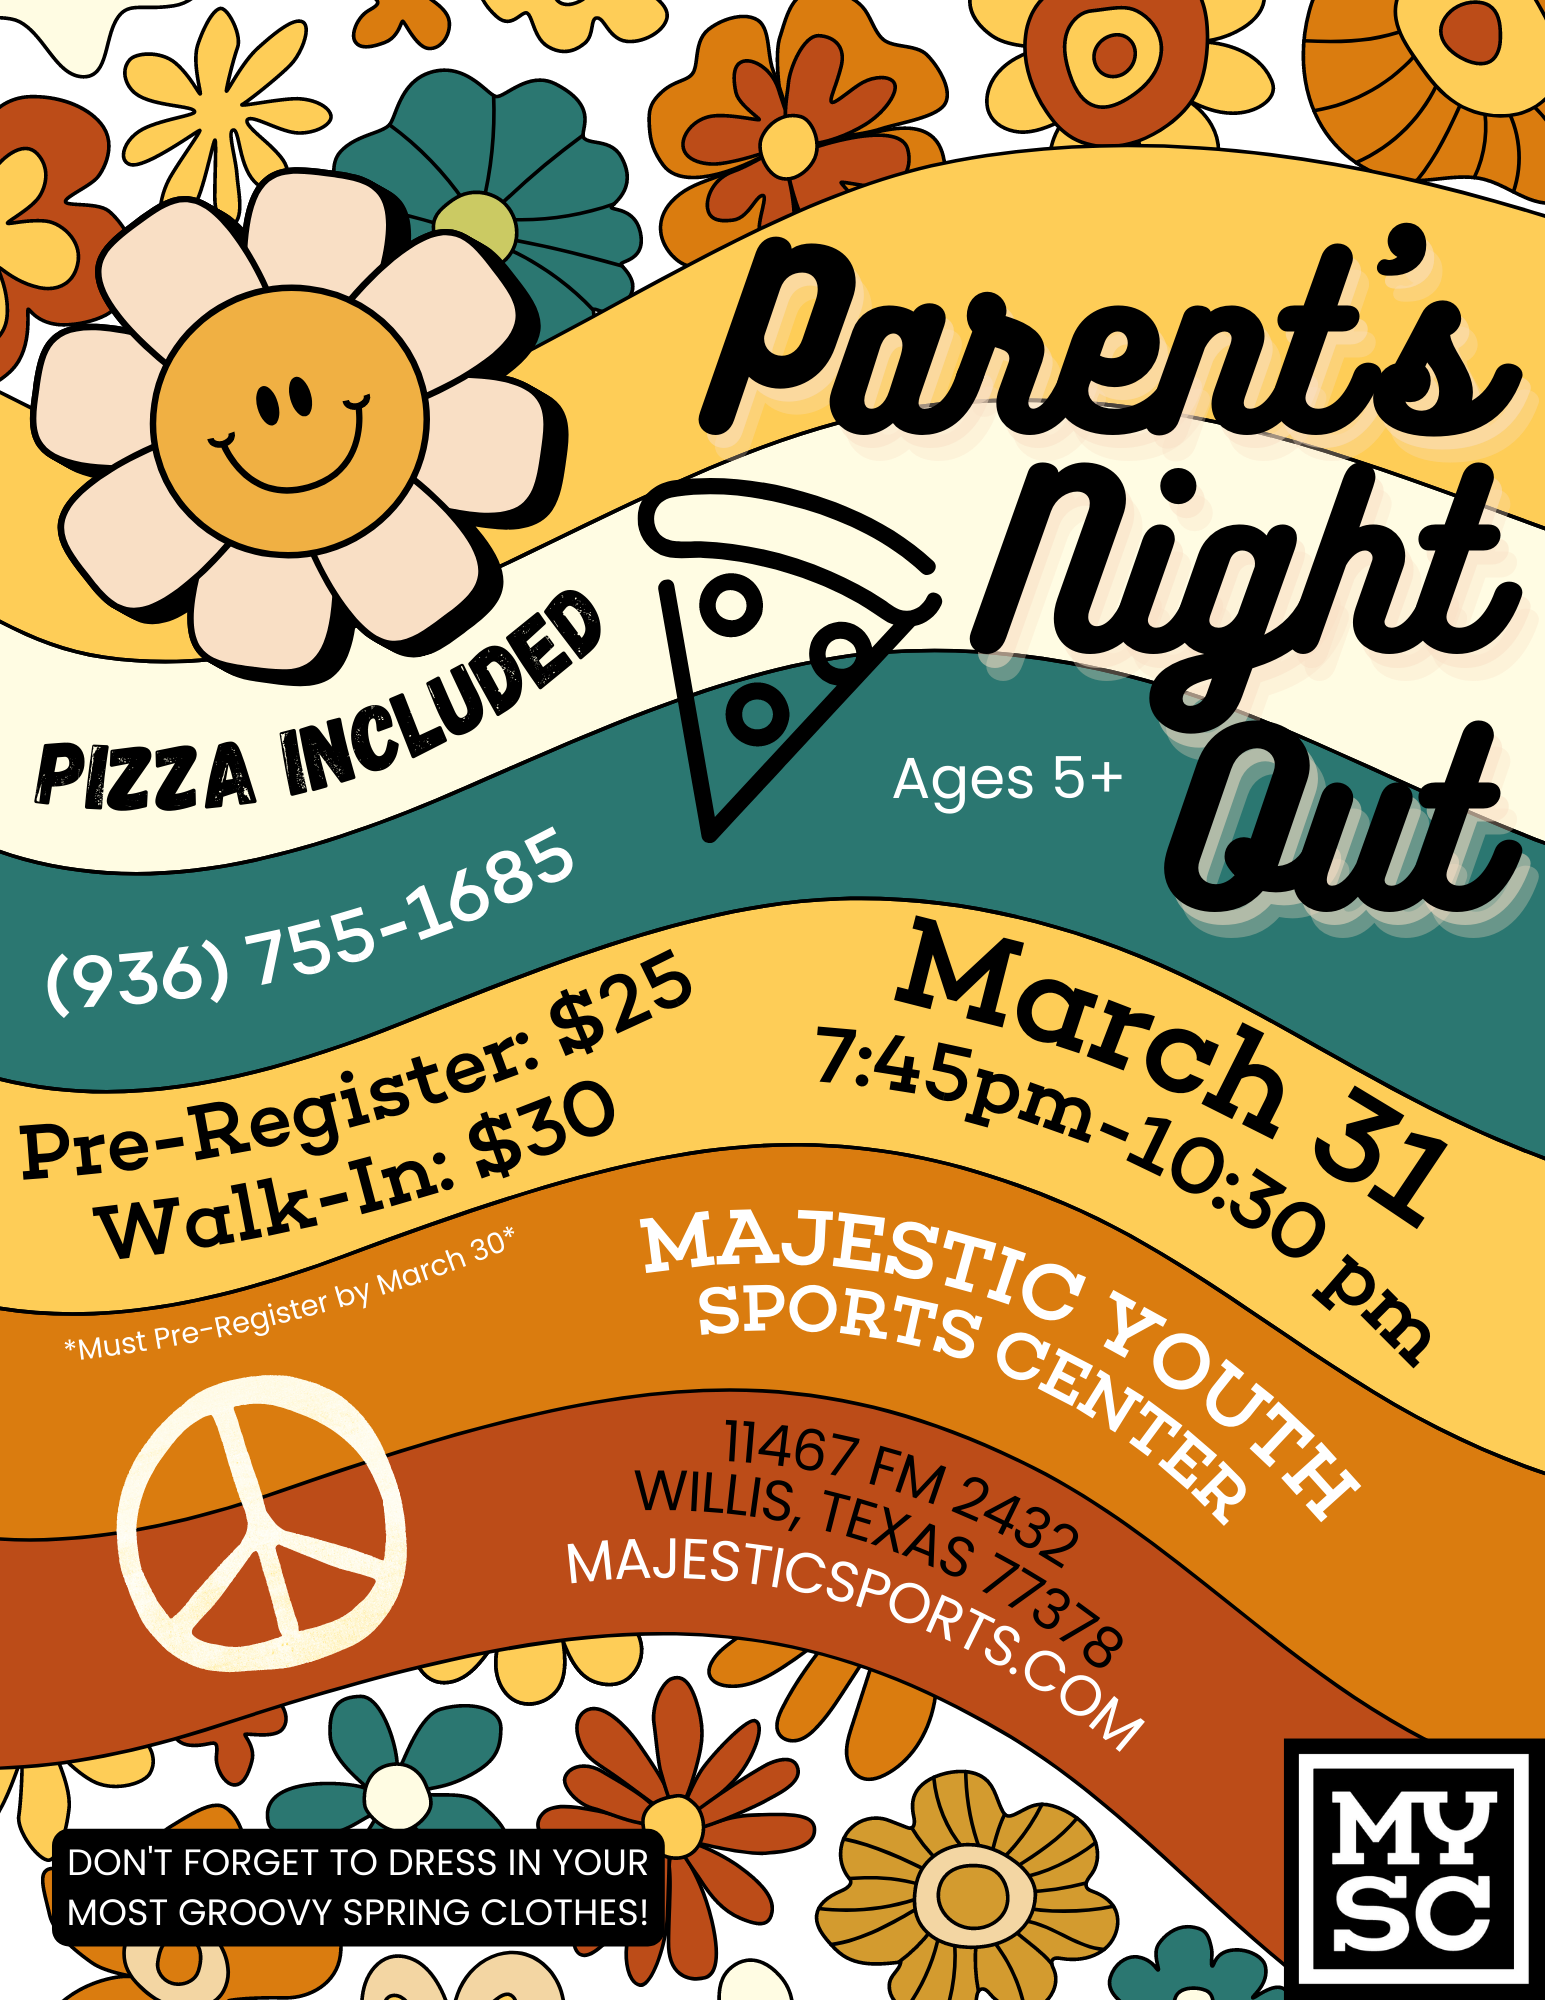 March Parents Night Out